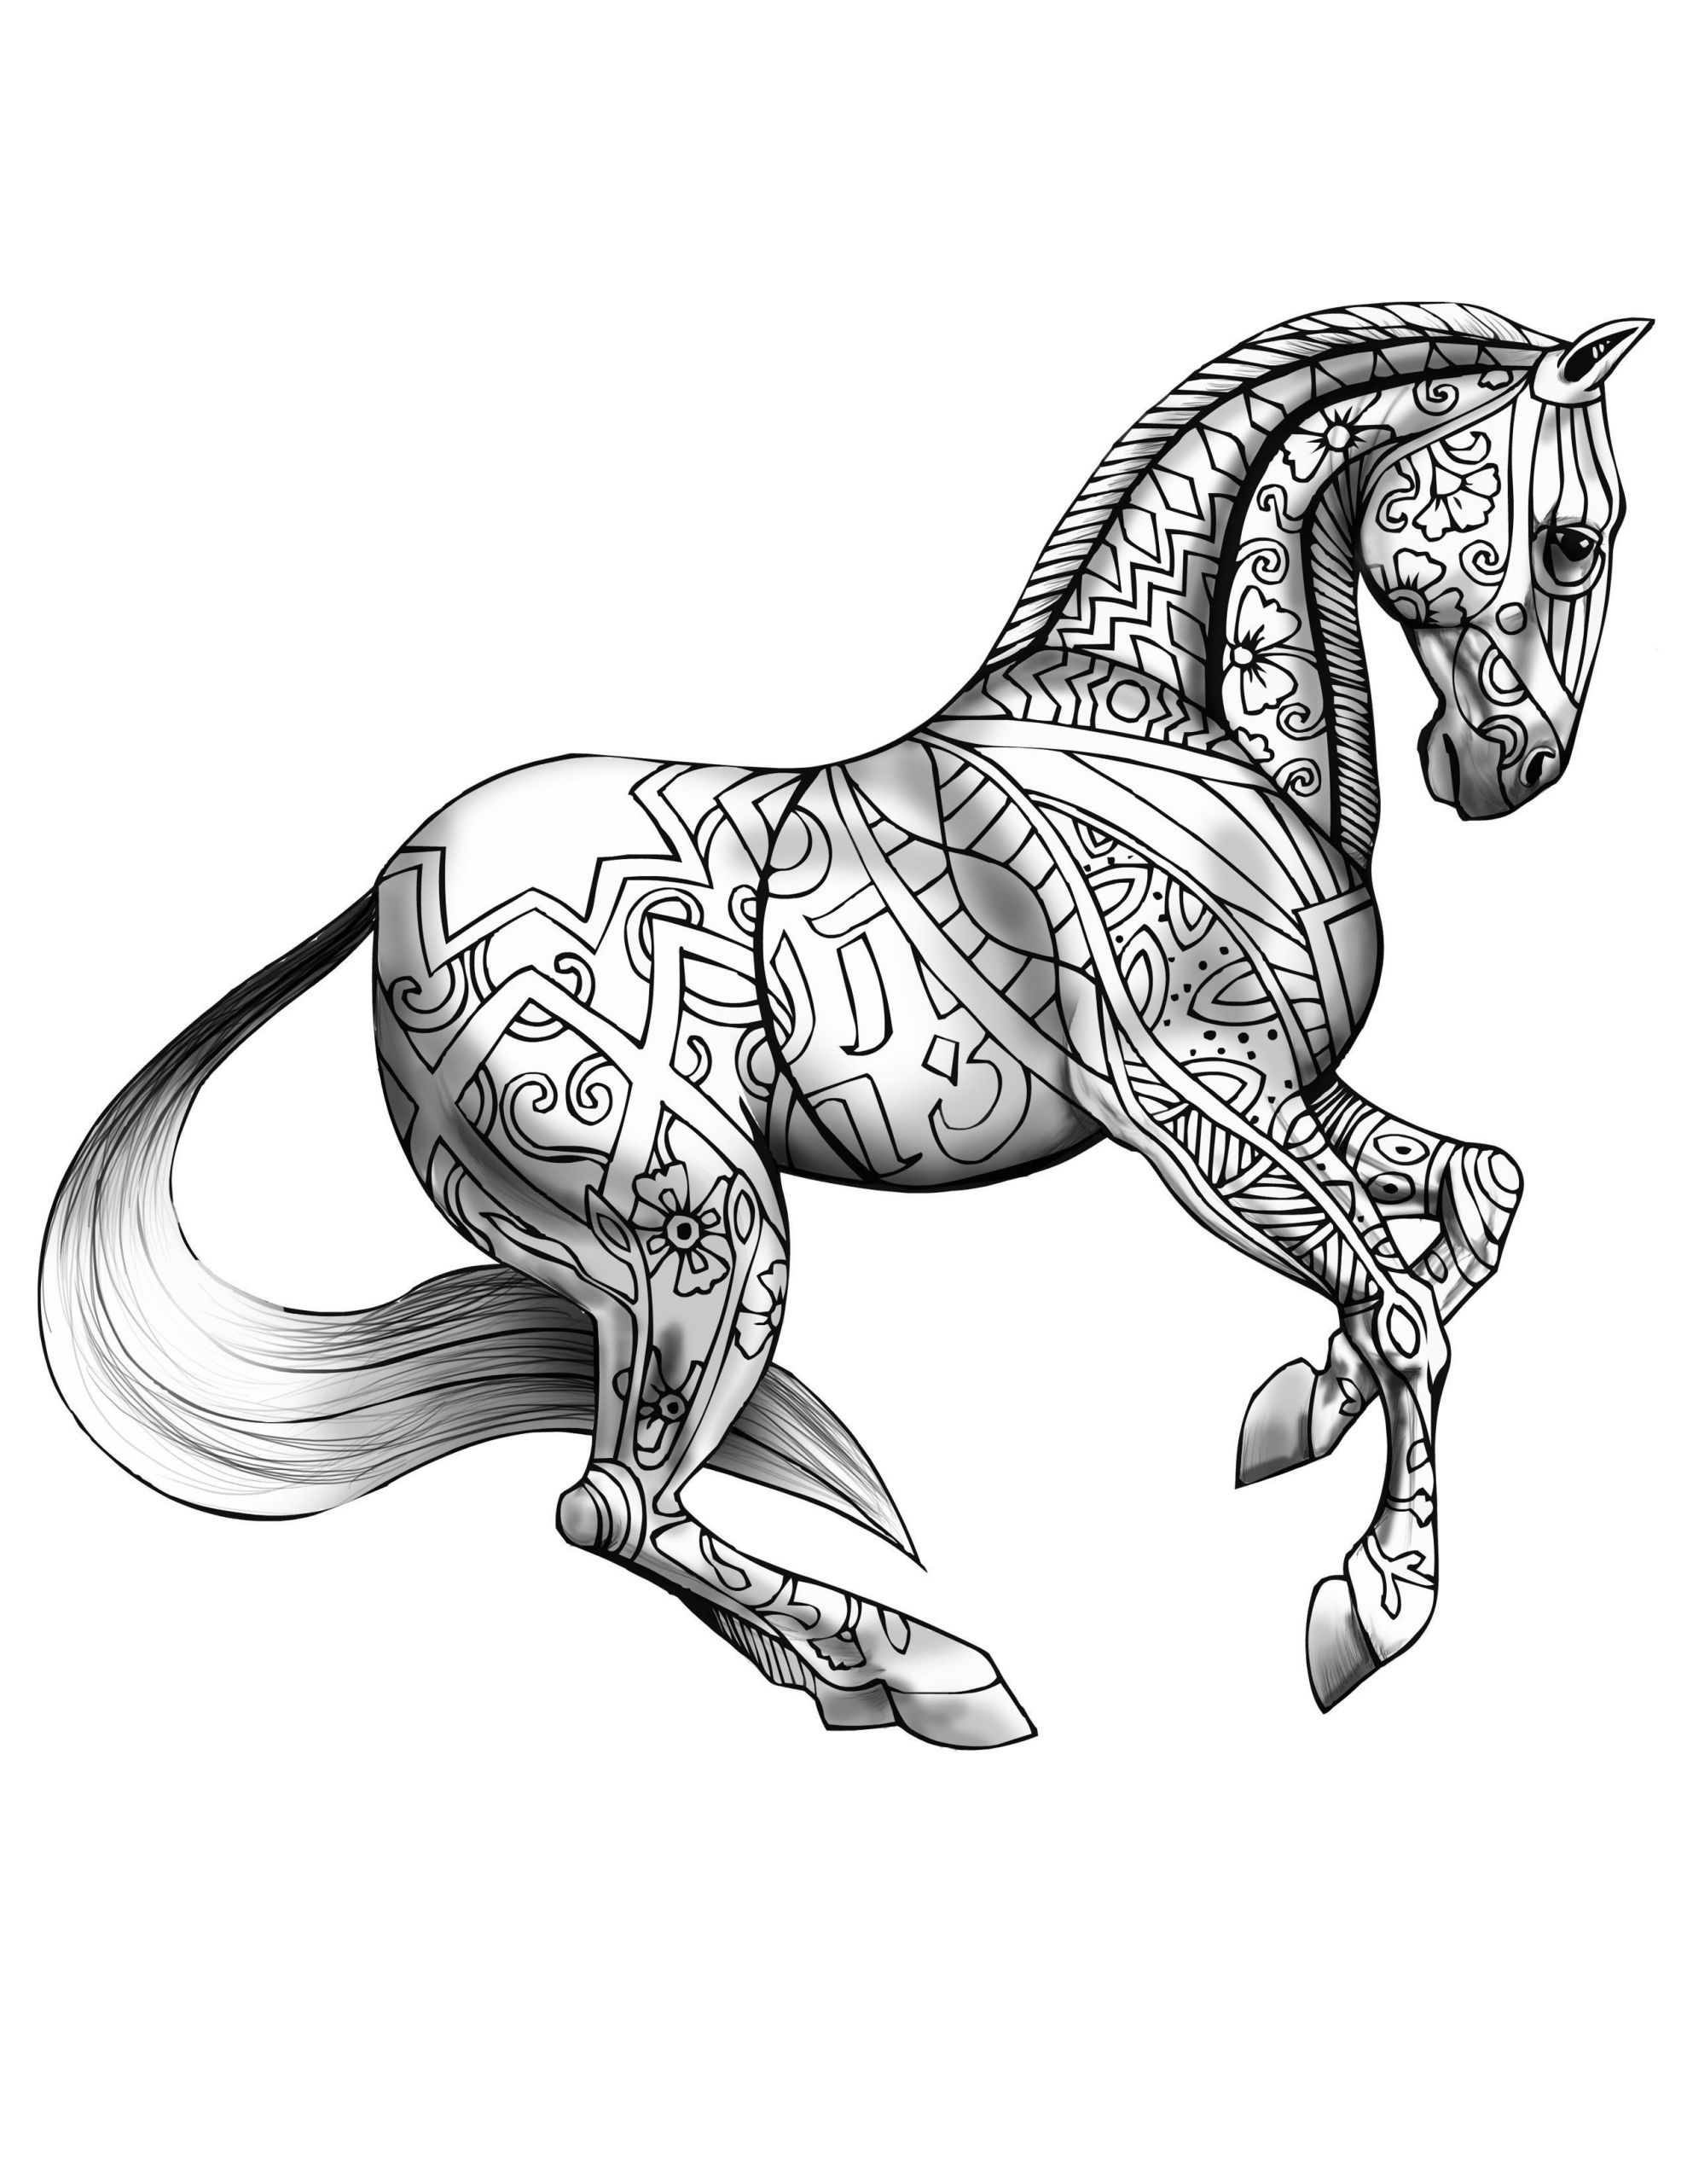 Adult Coloring Book Horse
 The 10 Best Ideas for Free Coloring Pages for Adults